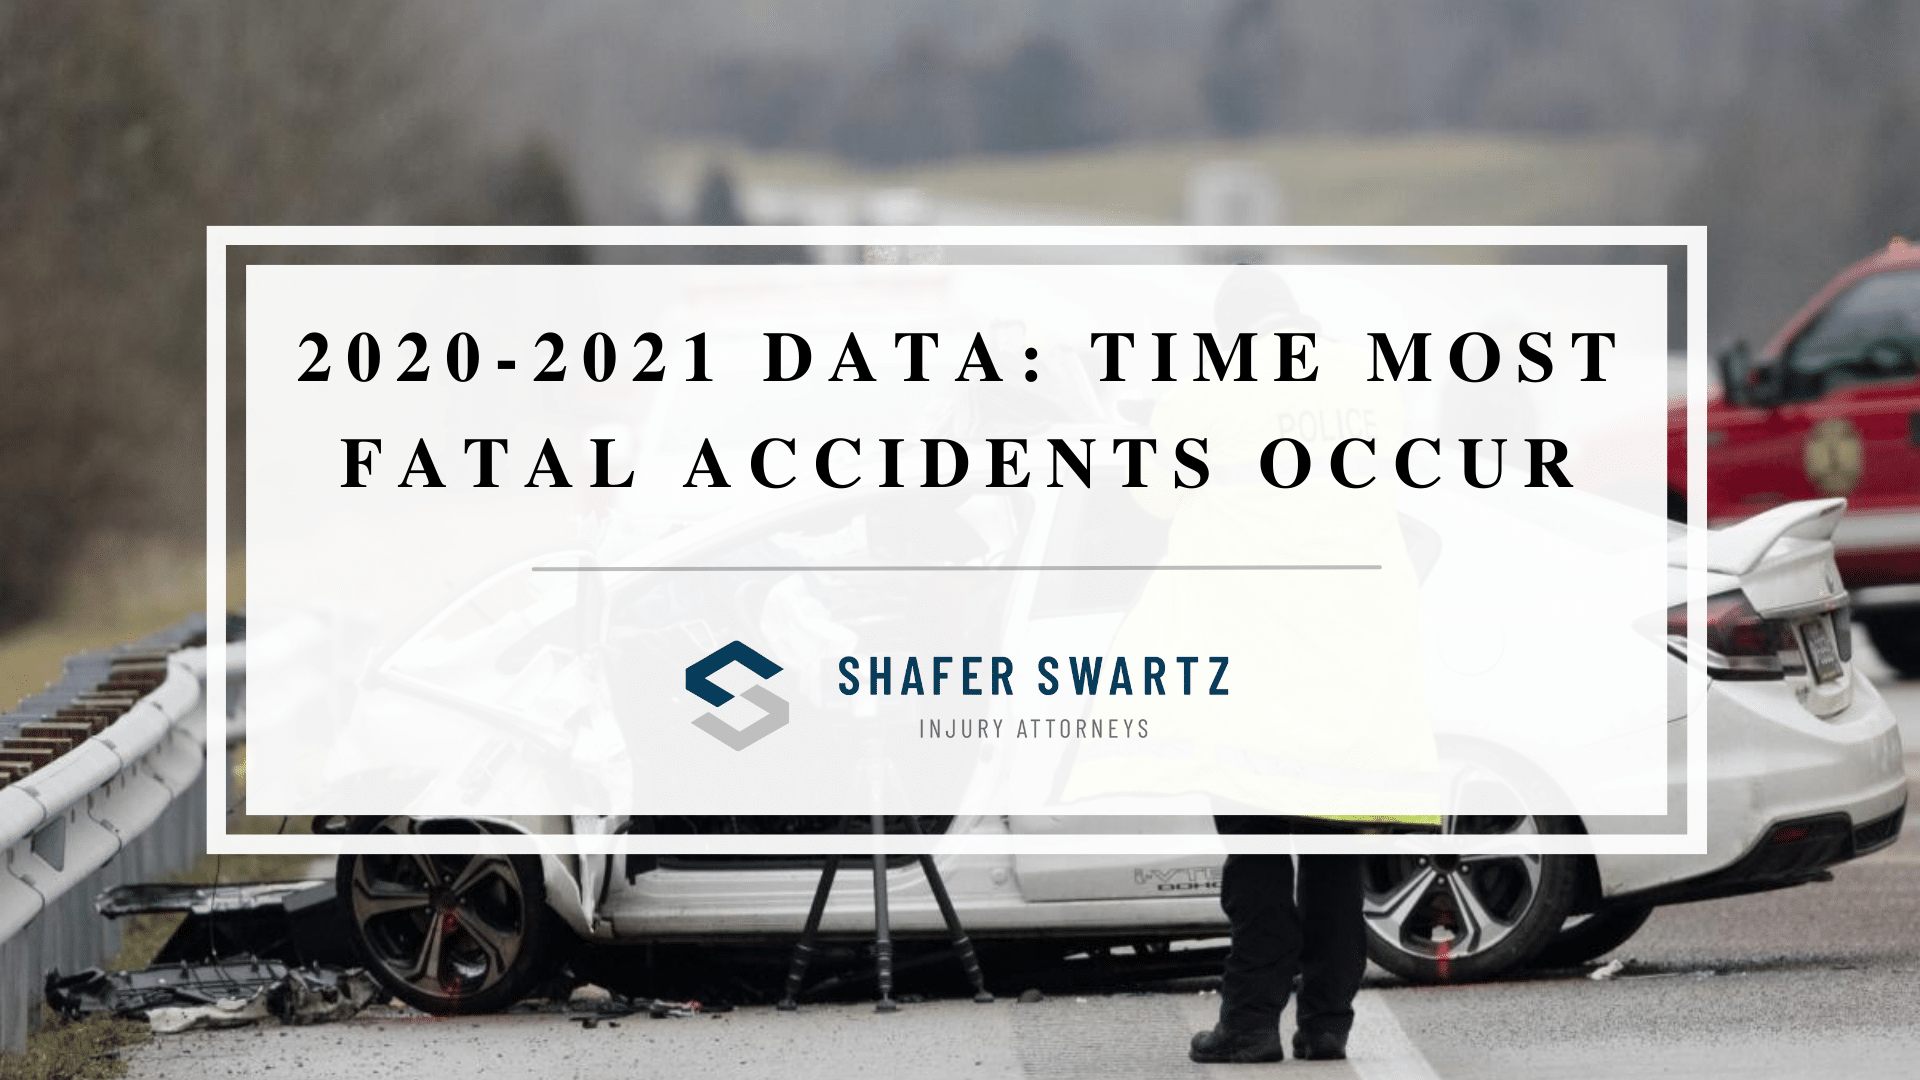 Featured image of time when most fatal car accidents occur